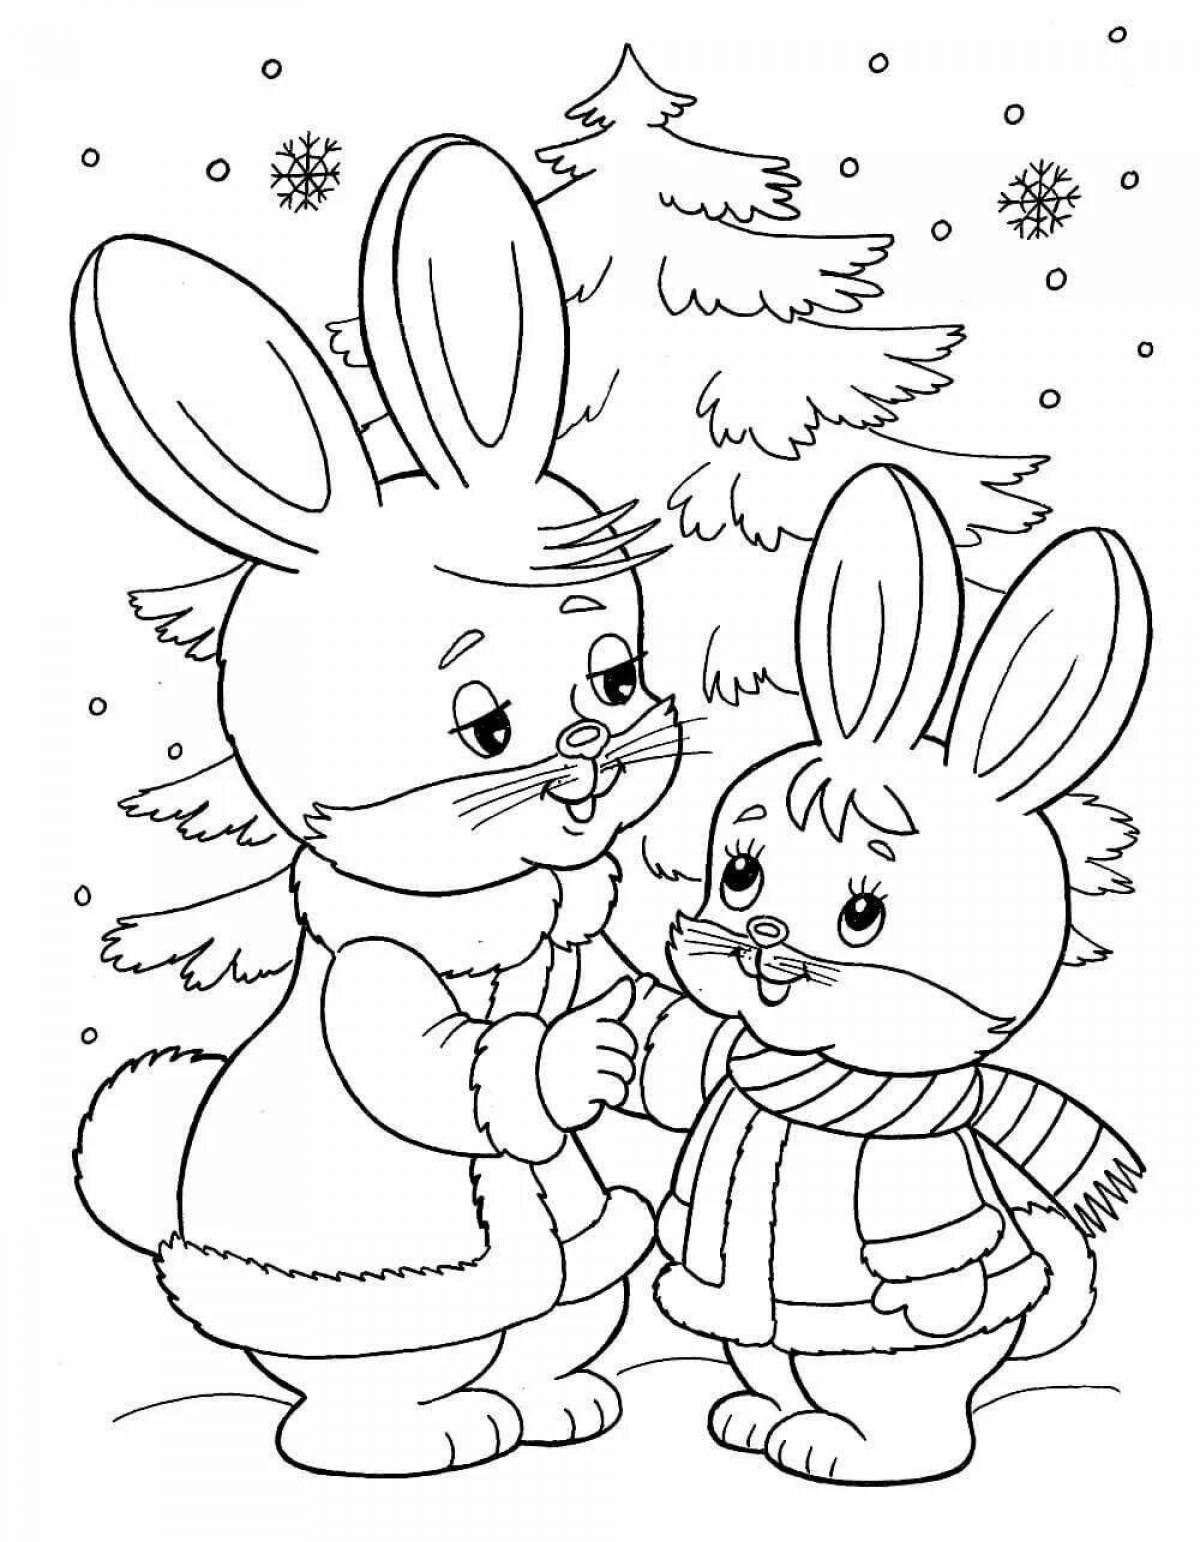 Shiny bunny coloring book with gift